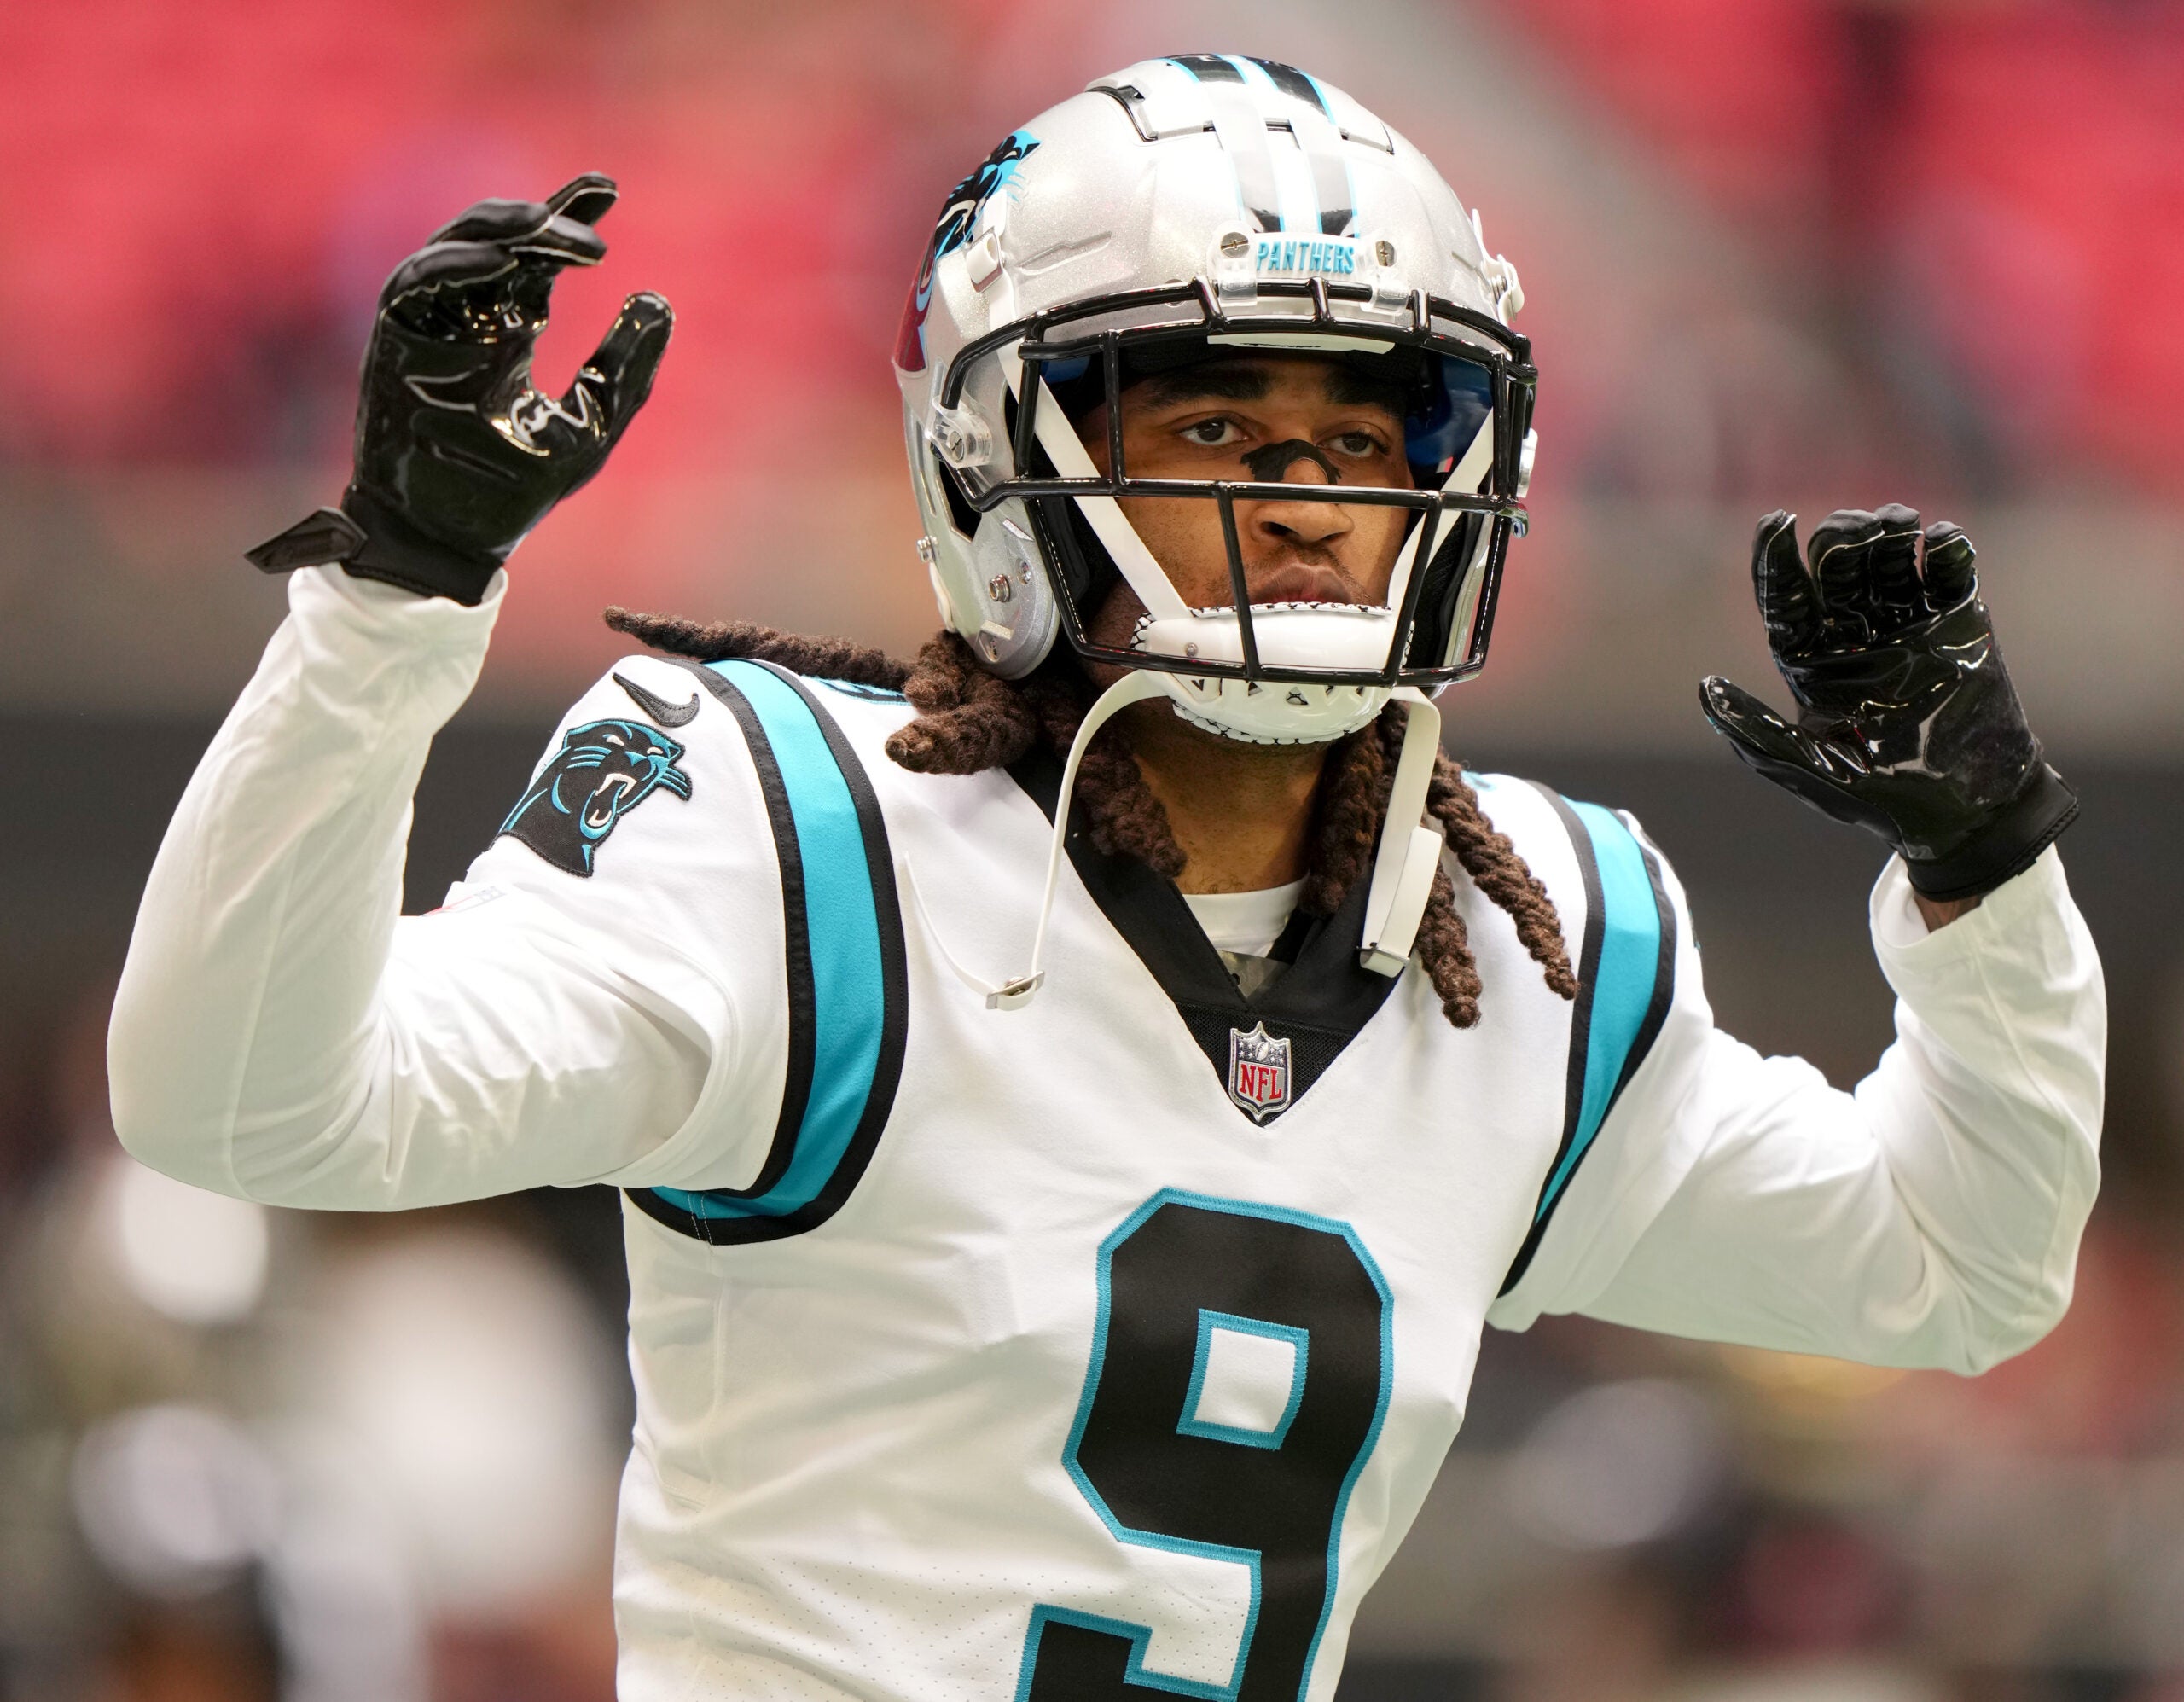 5 Panthers players to watch against the Patriots in Week 9